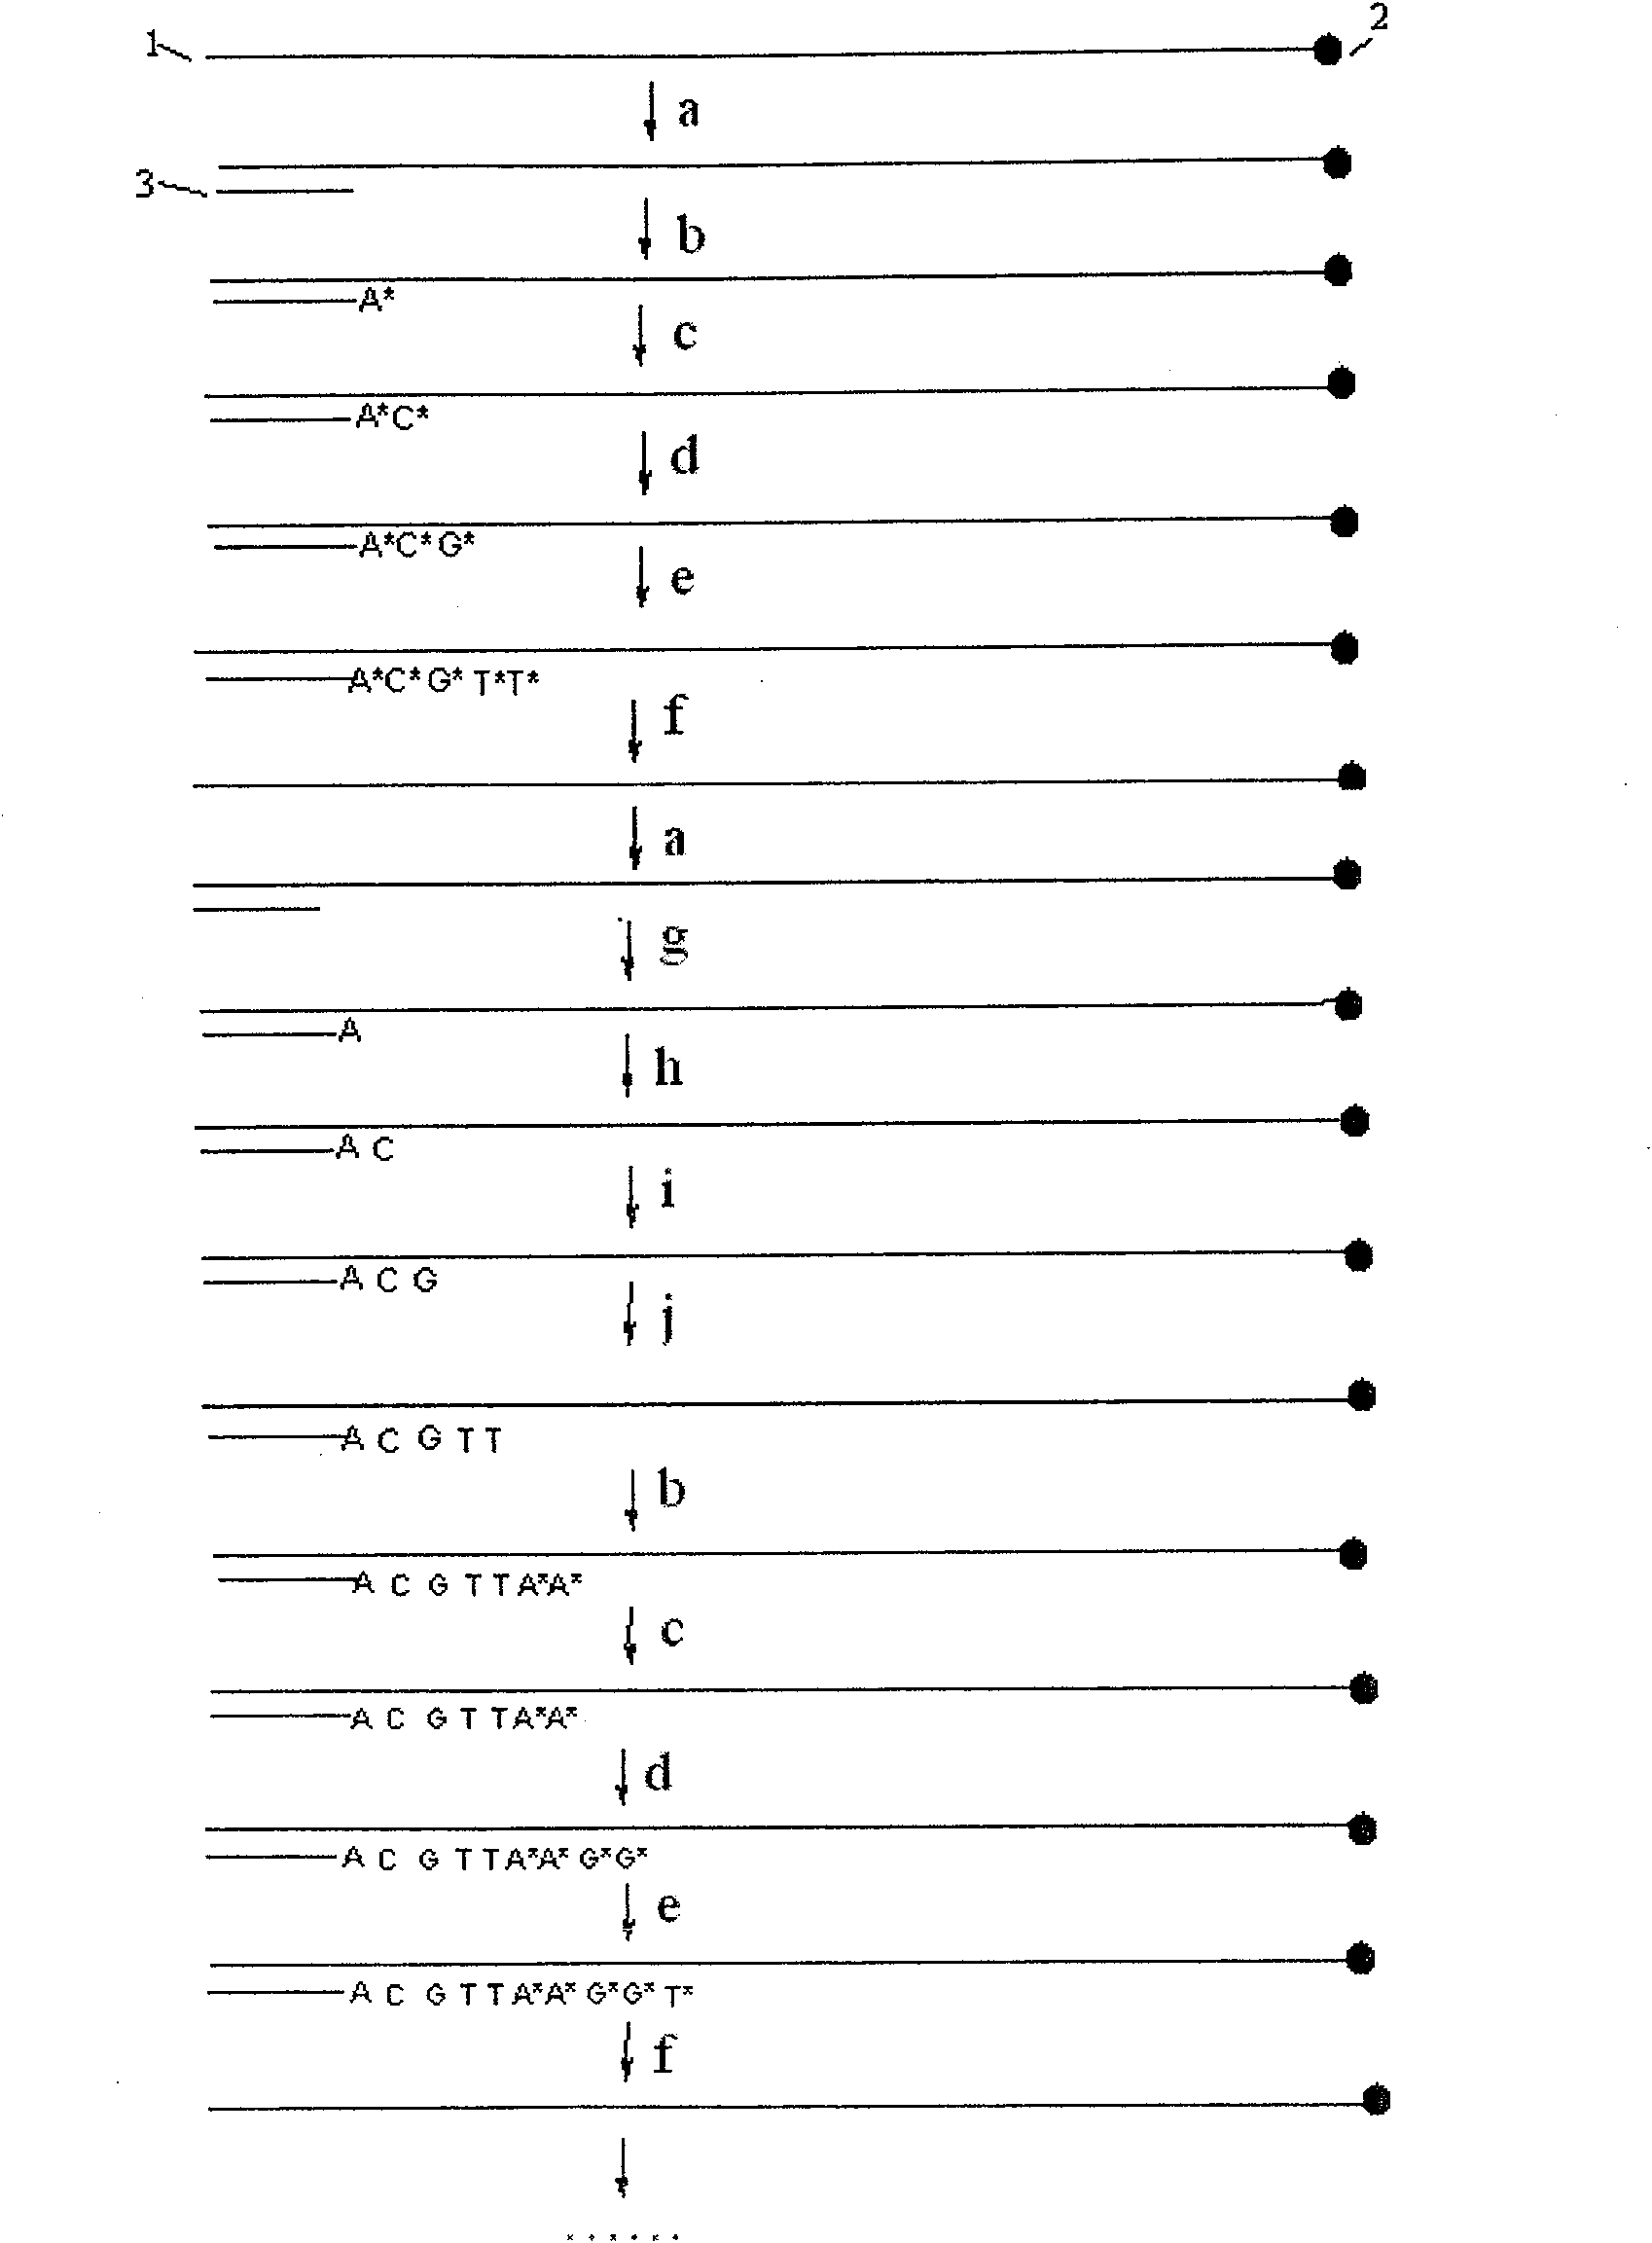 Method for extending DNA sequence by cyclical crosses